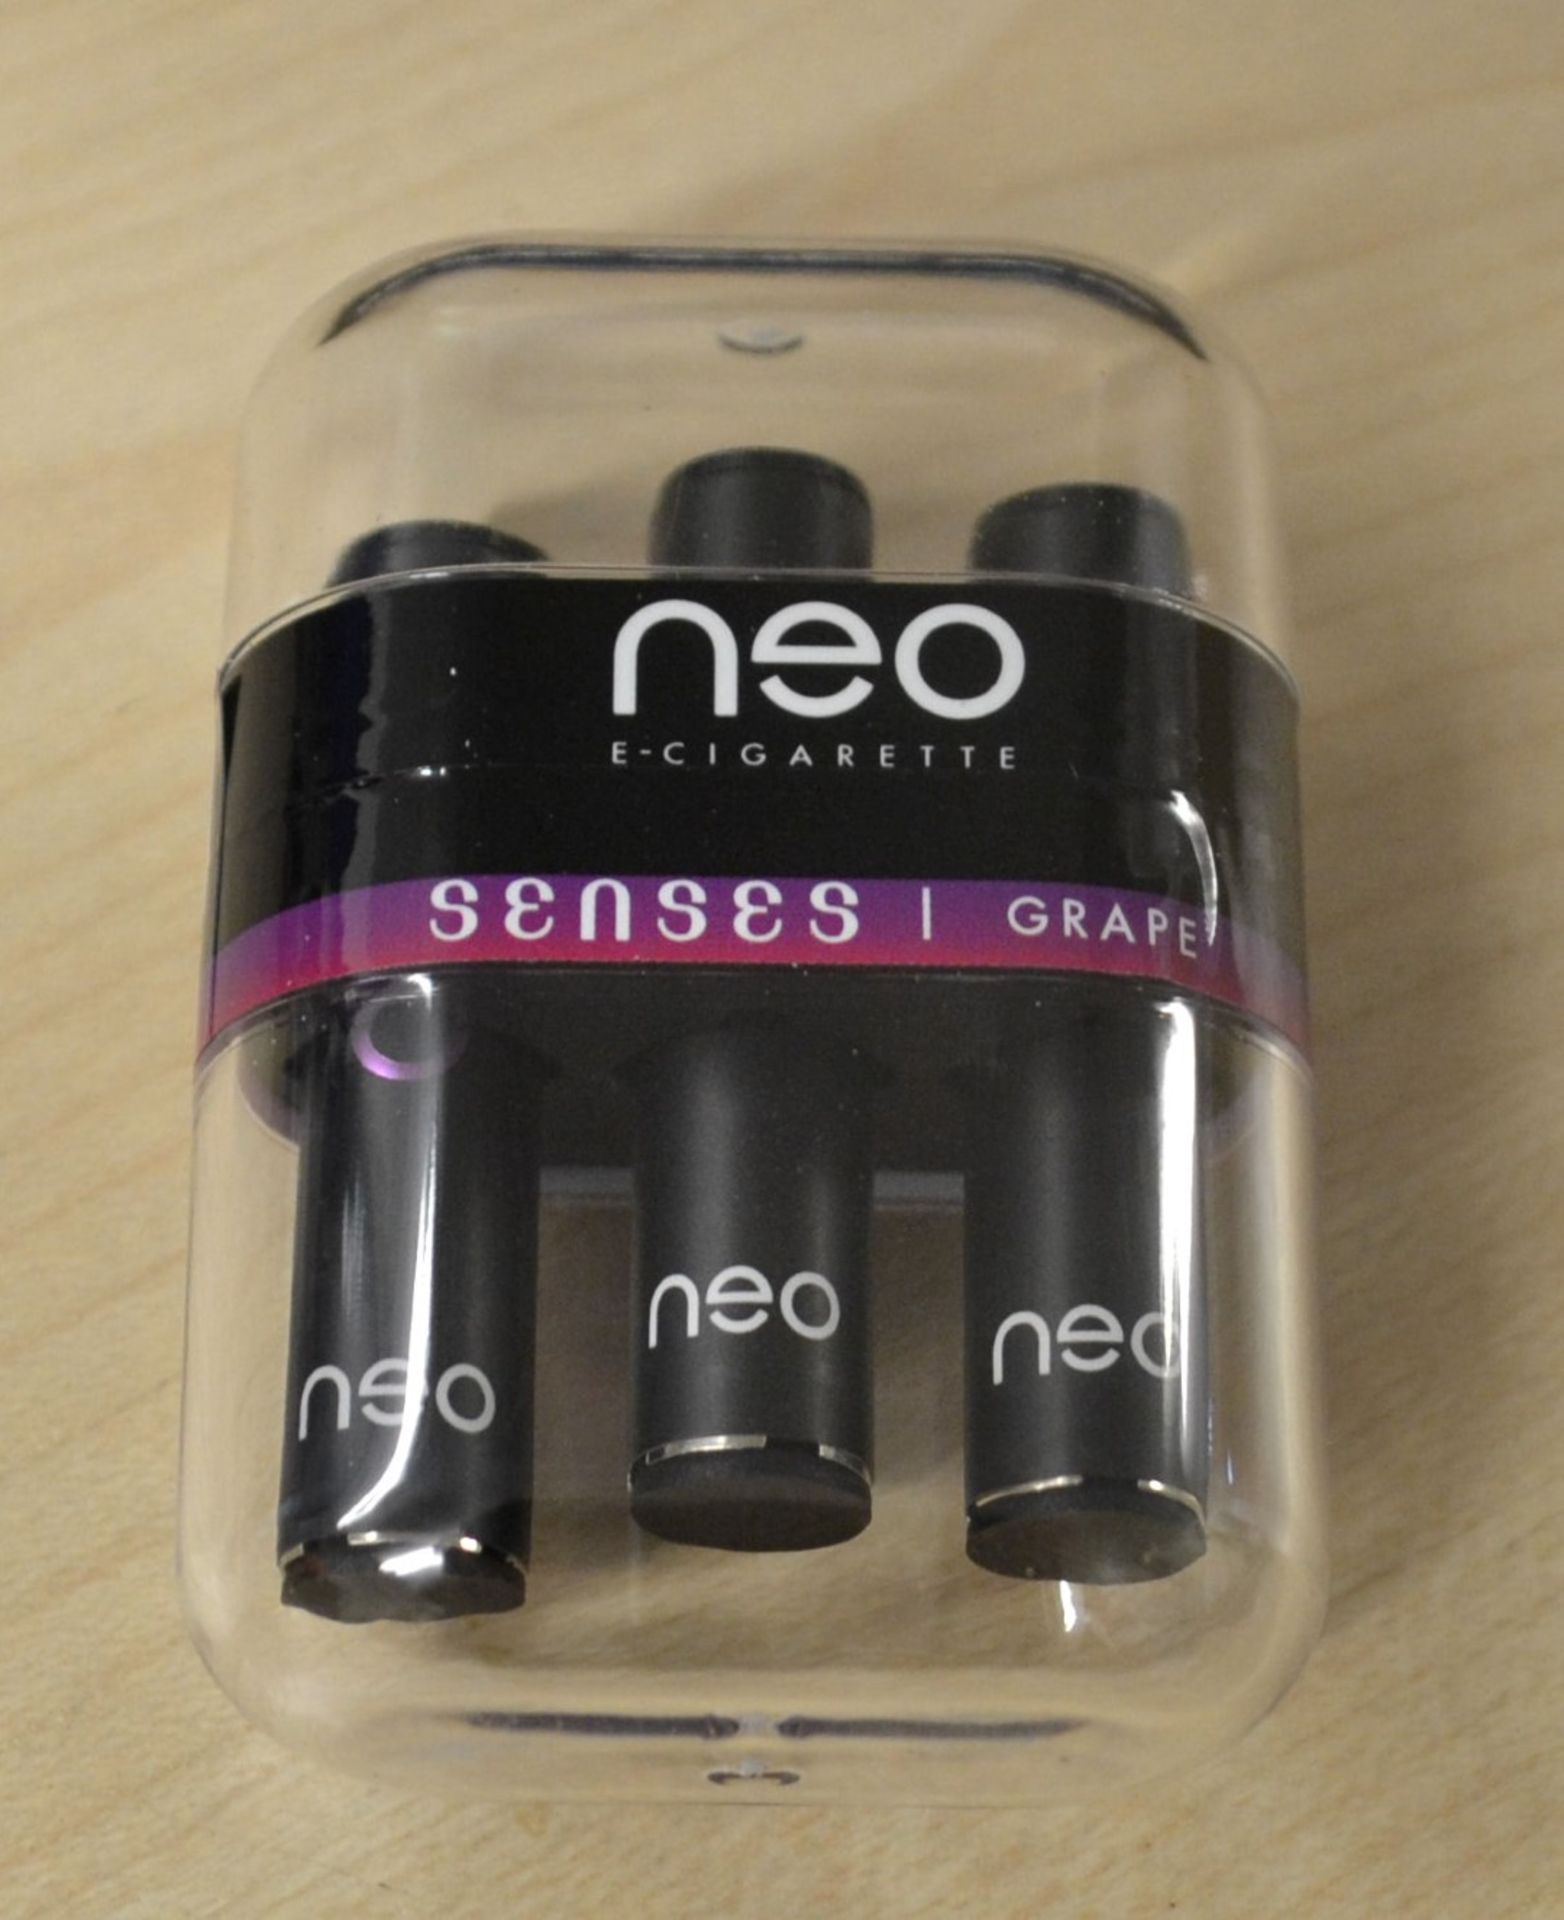 36 x Neo E-Cigarettes Neo Infinity Grape Refill Packs - New & Sealed Stock - CL185 - Ref: DRTGRP - L - Image 5 of 7